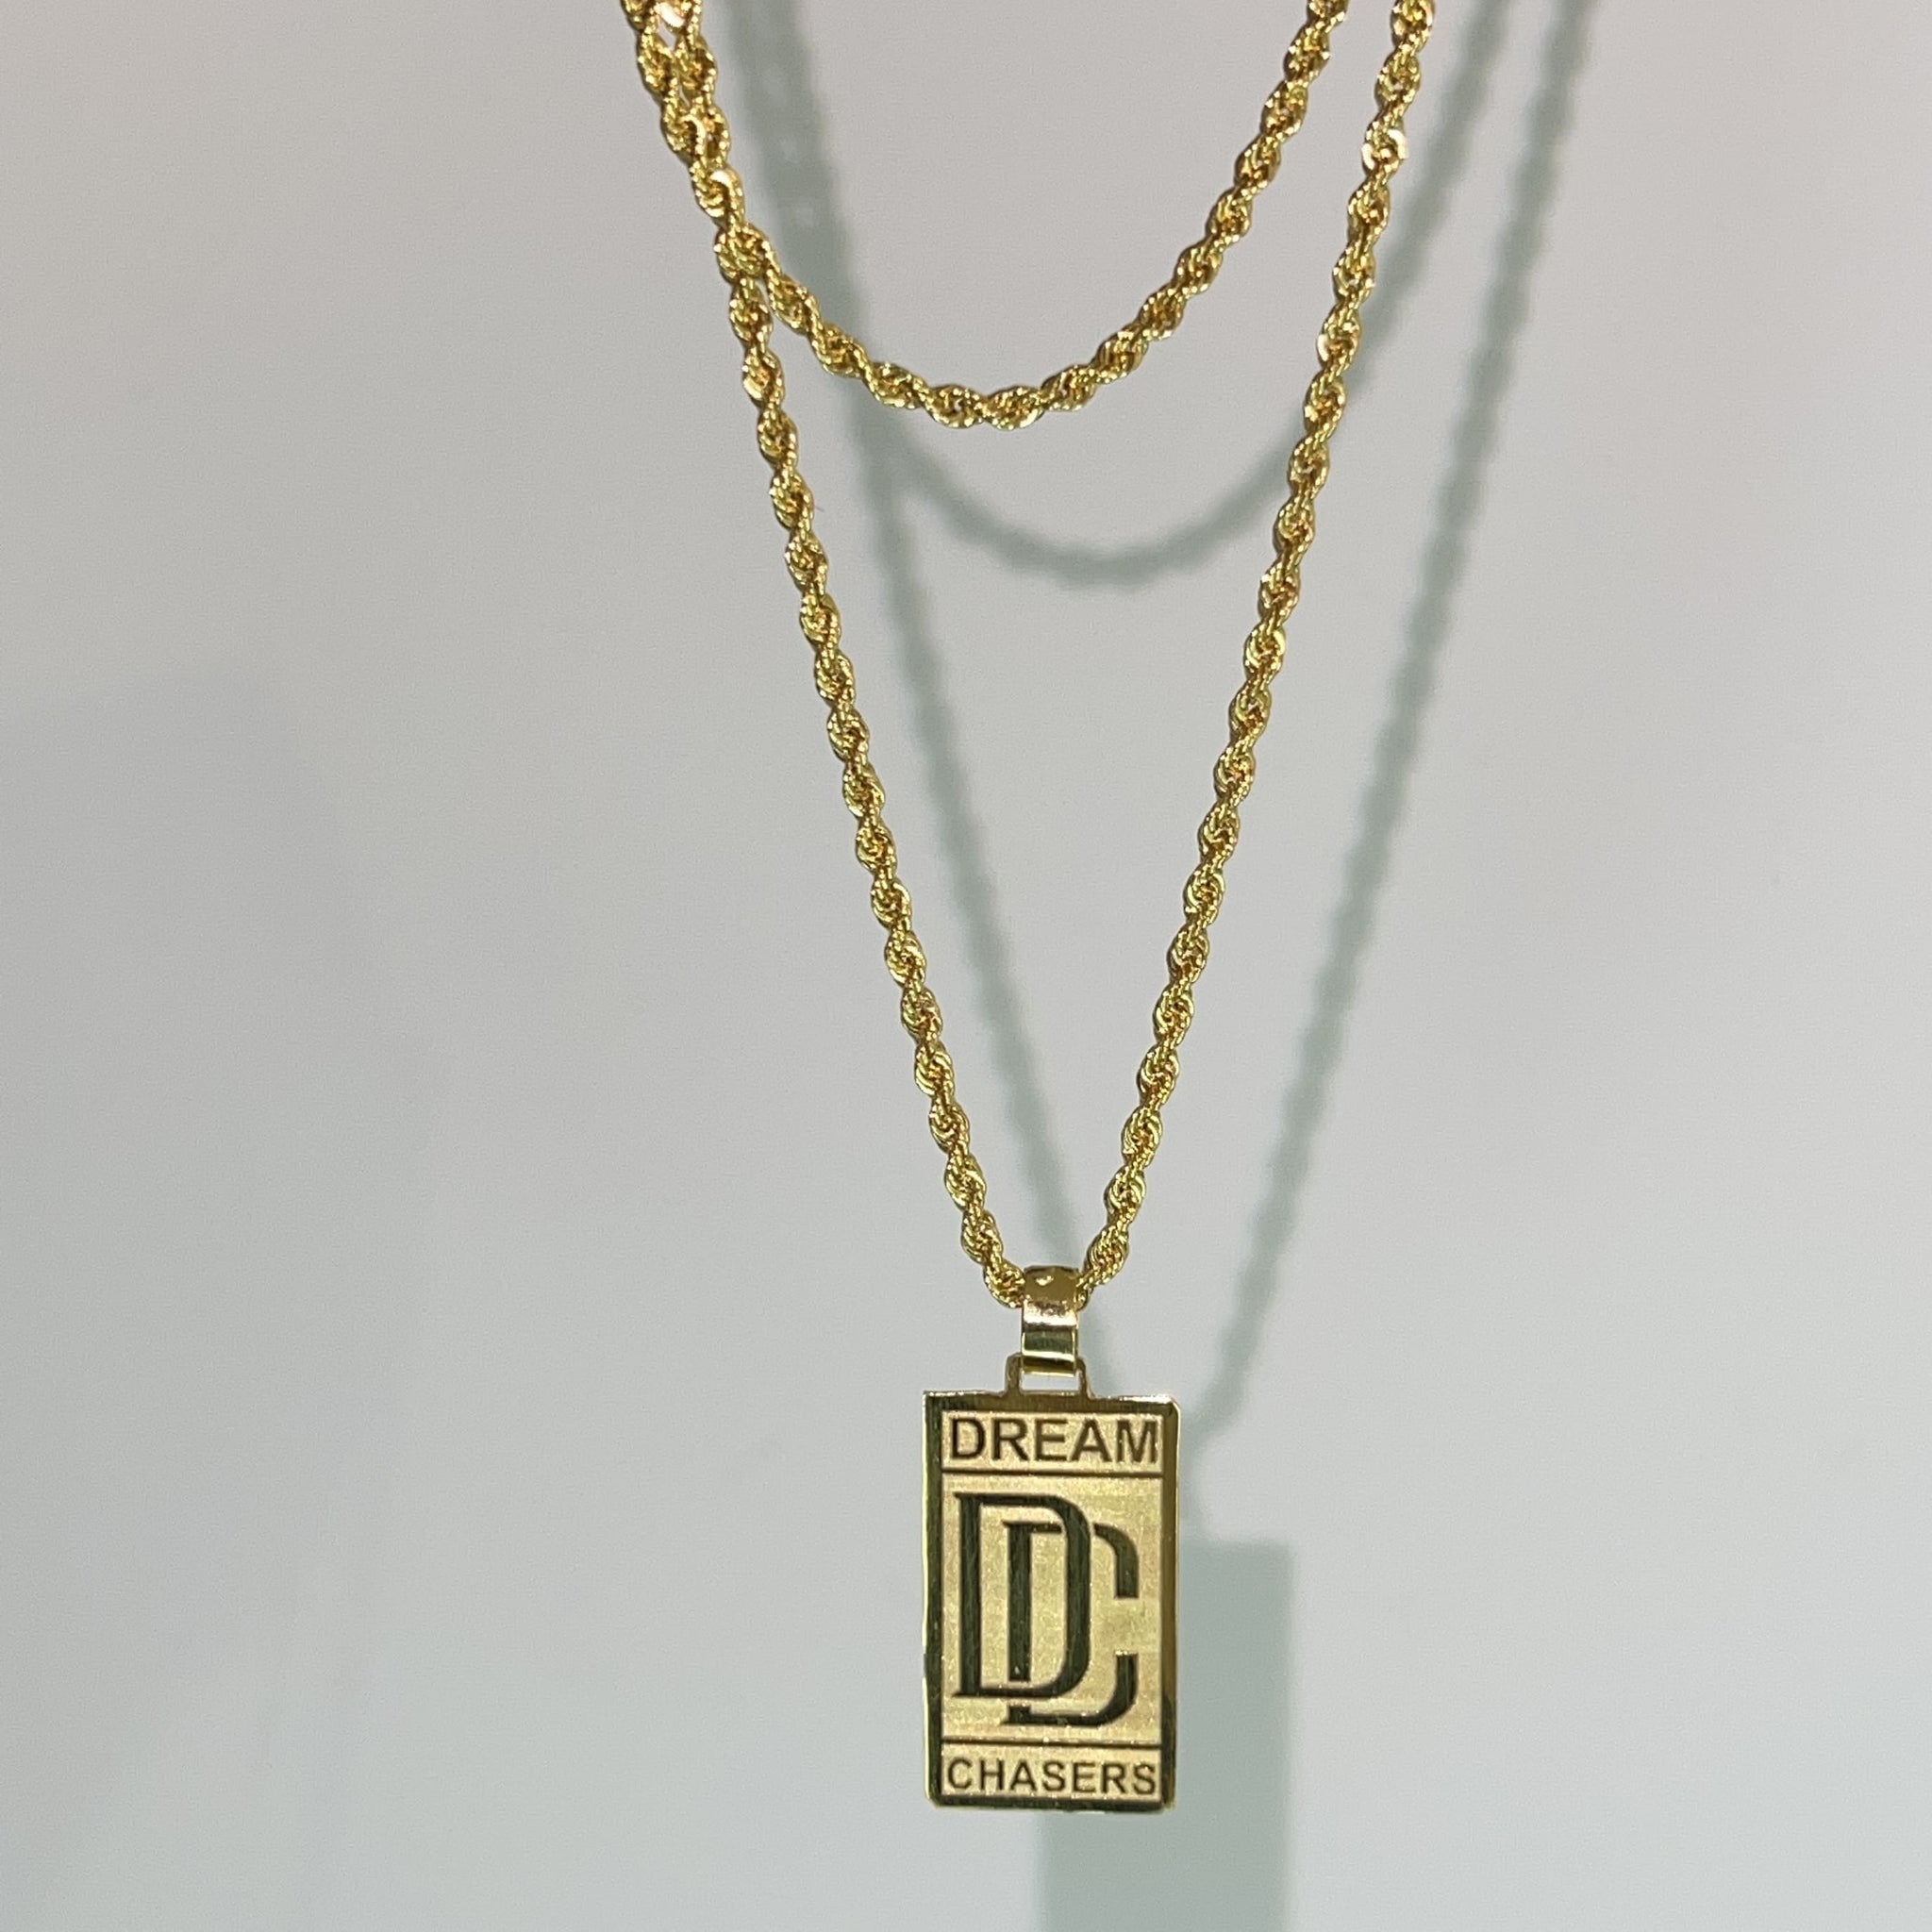 Rope chain + Dream Chasers pendant - 14 carat gold - 55cm / 2.2mm